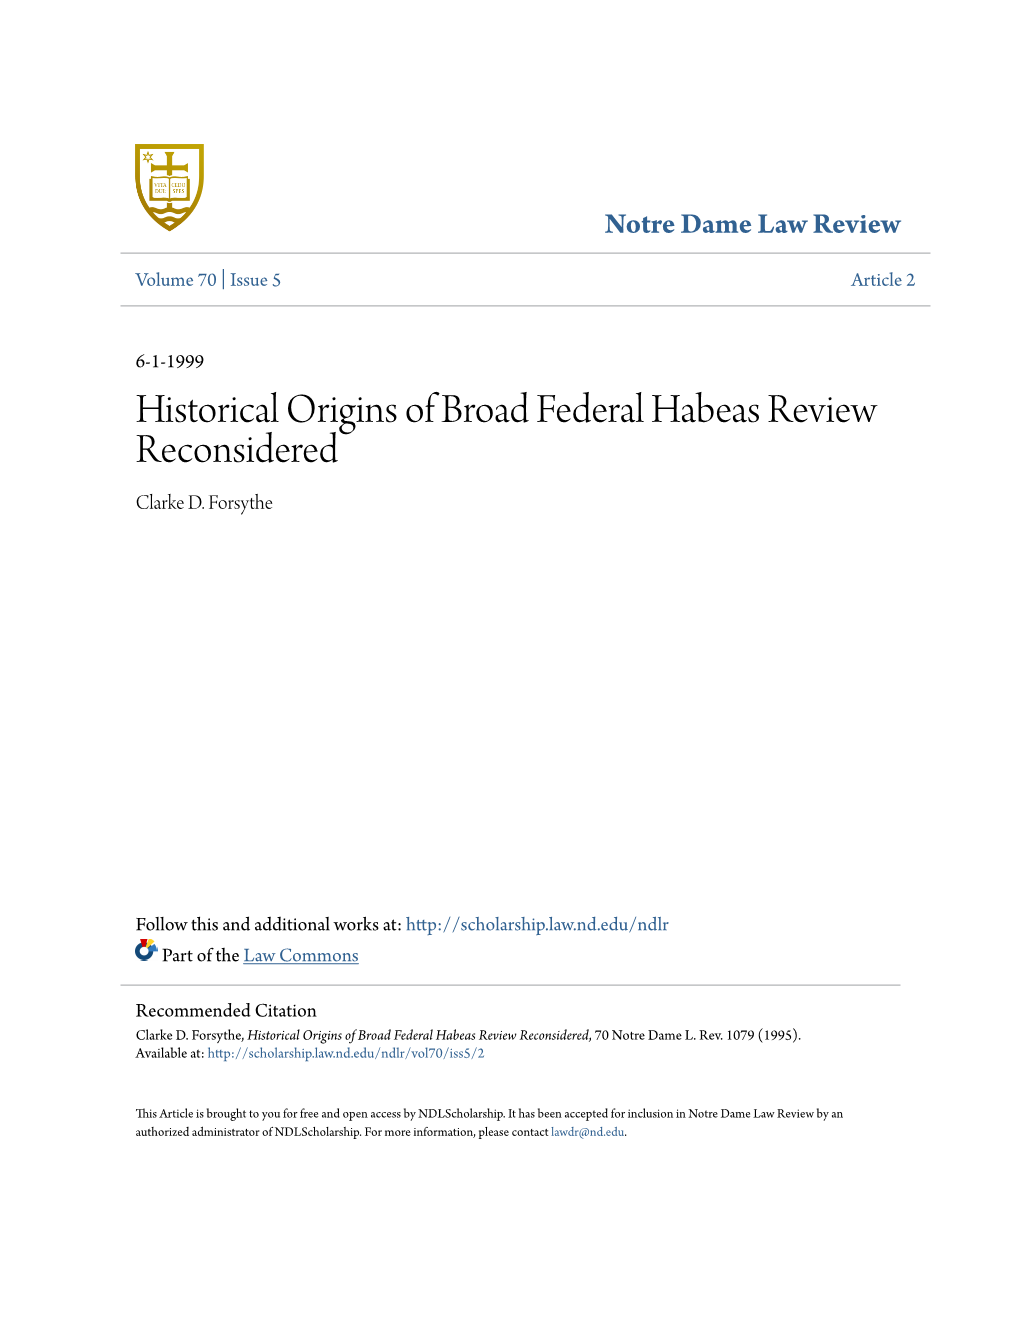 Historical Origins of Broad Federal Habeas Review Reconsidered Clarke D